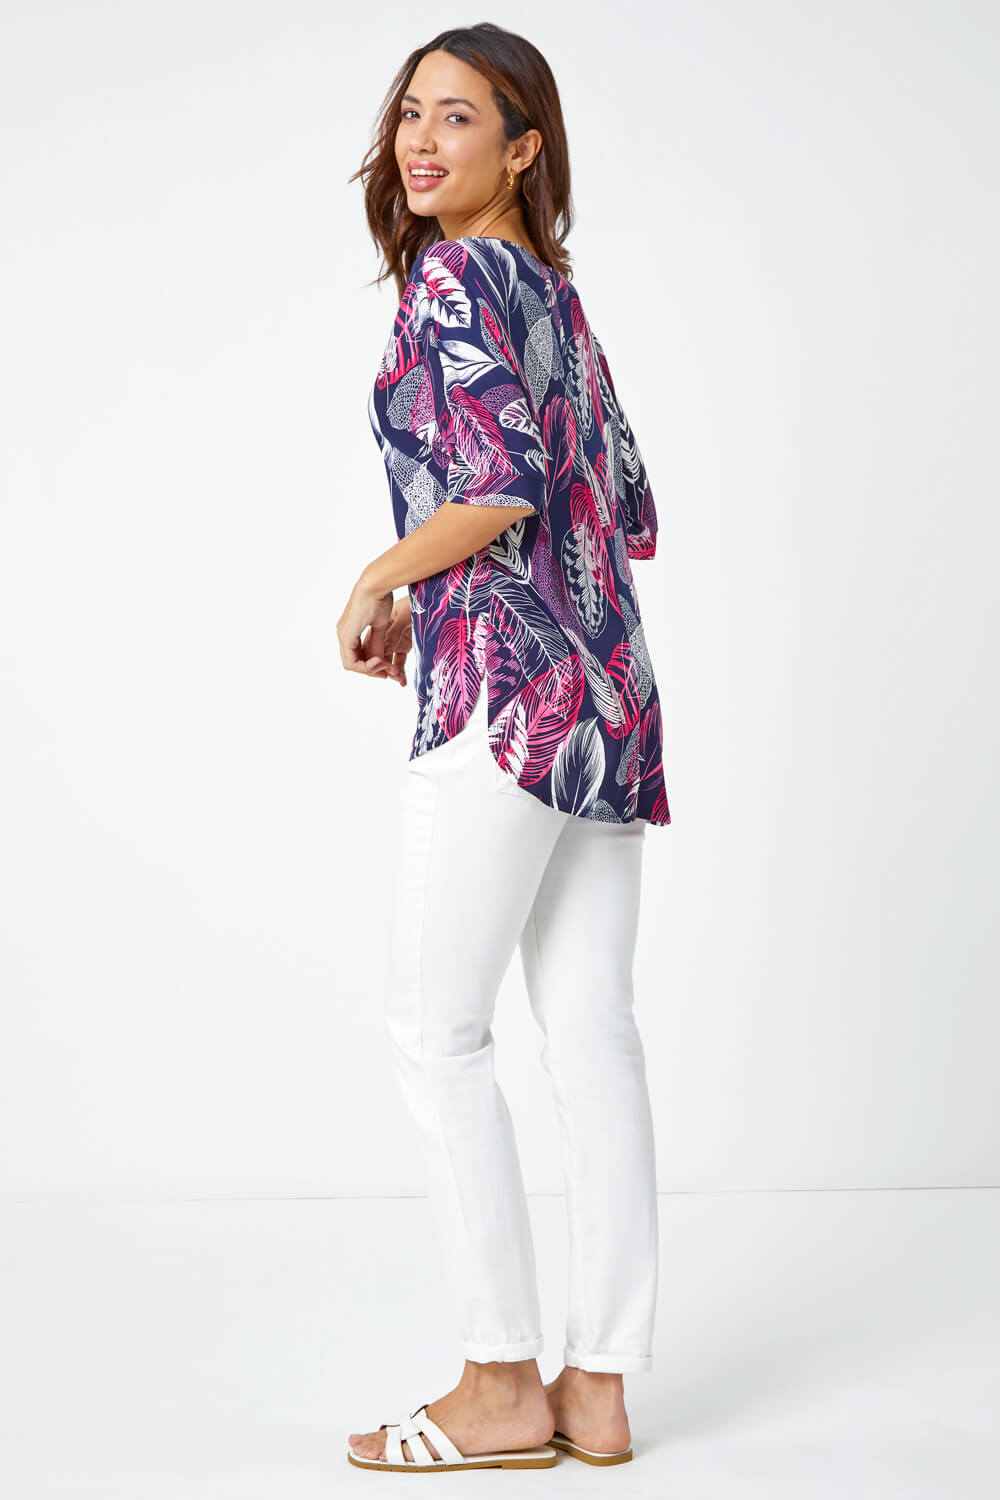 PINK Leaf Print Textured Tunic Top, Image 3 of 5